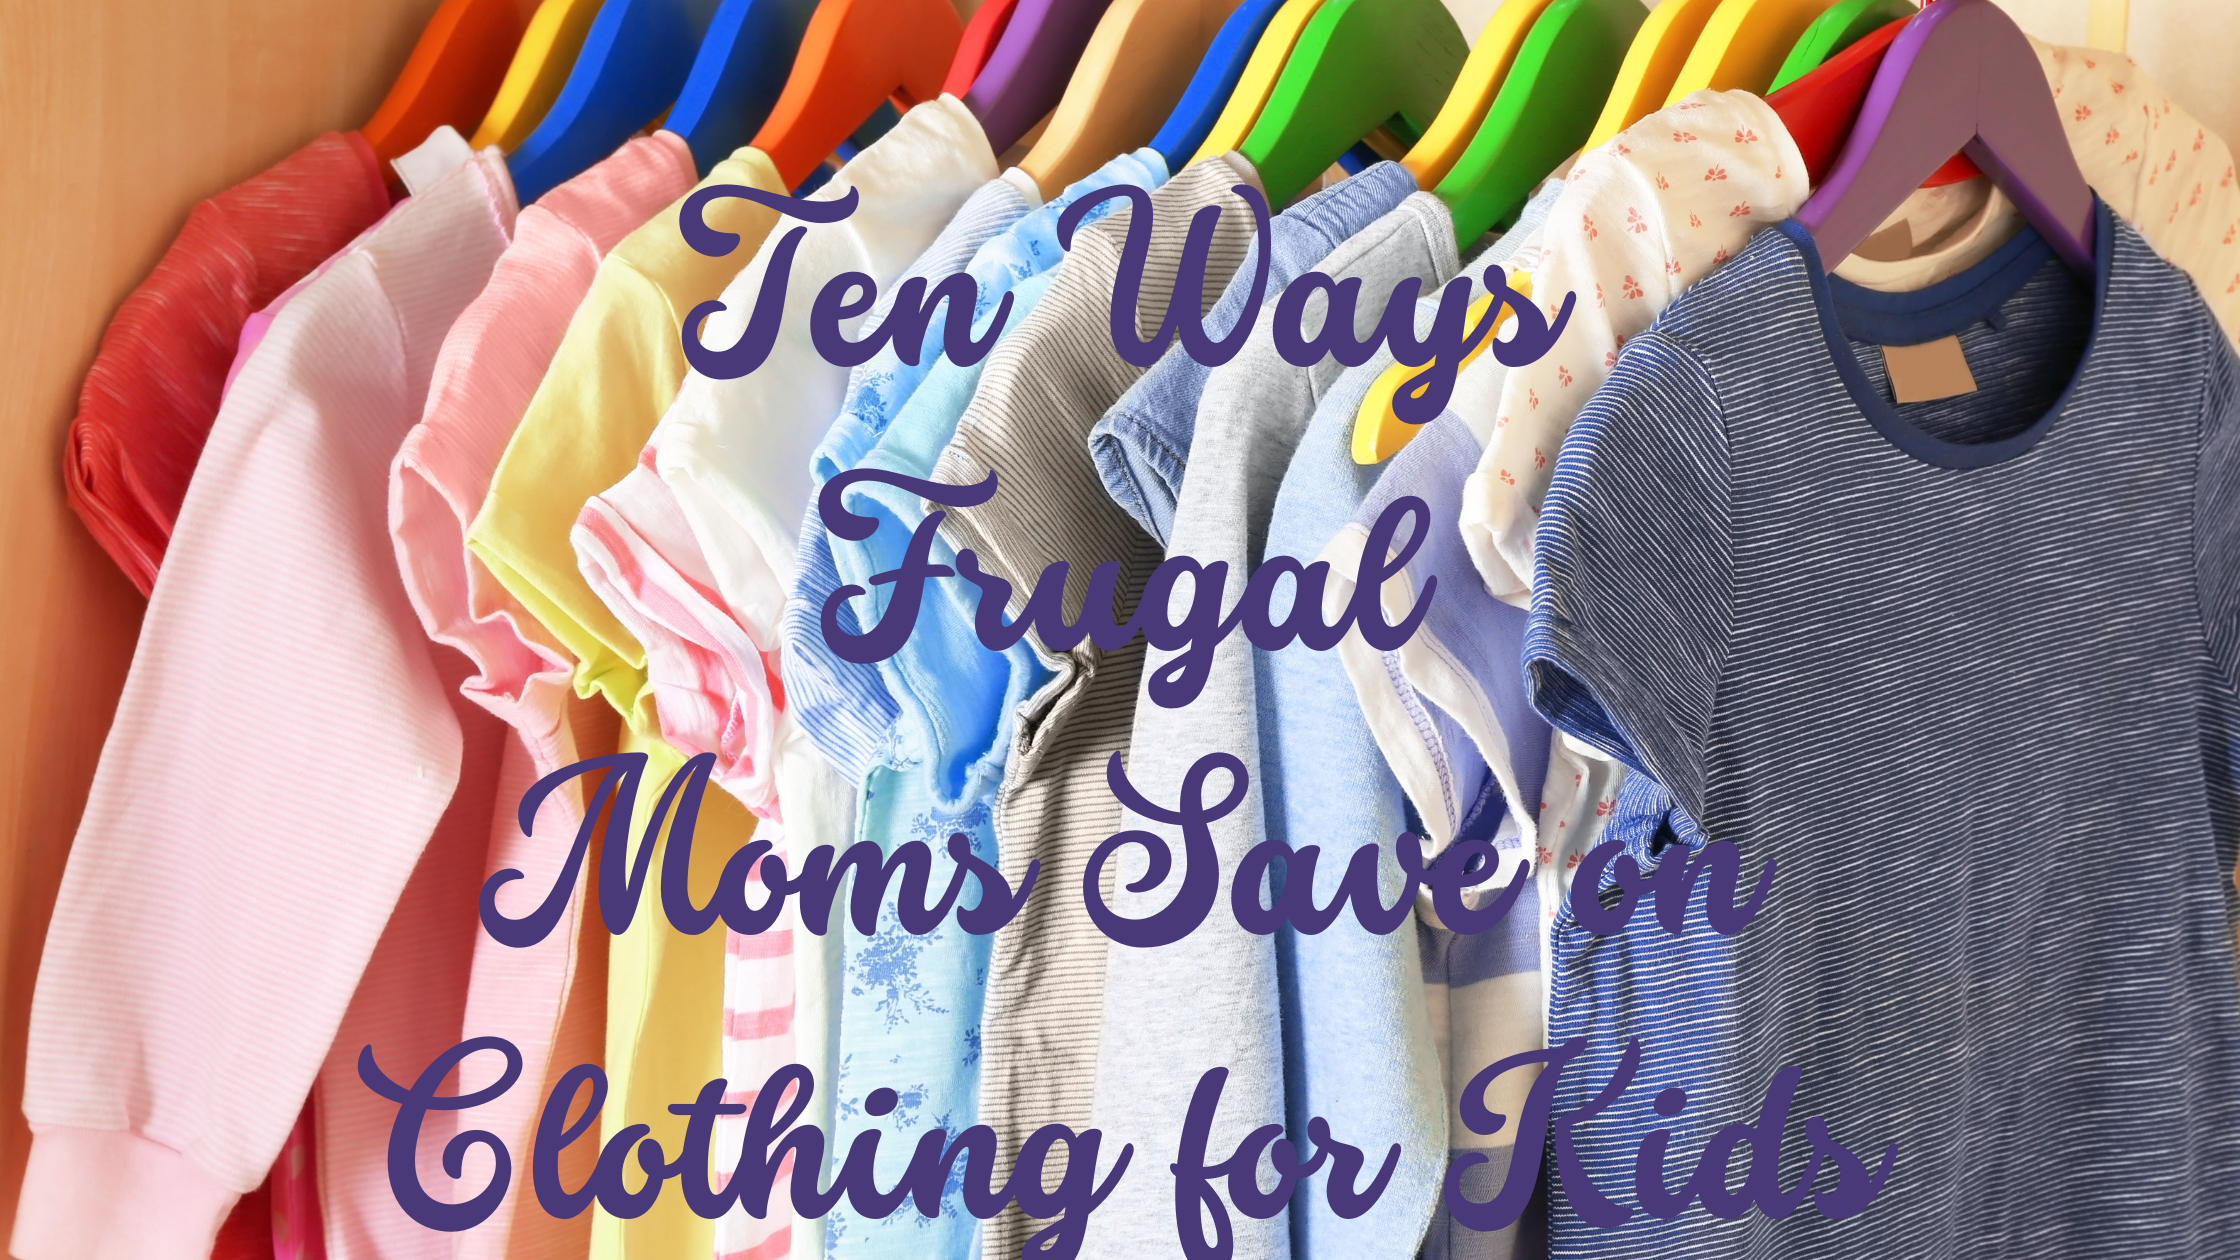 Ten Ways Frugal Moms Save on Clothing for Kids